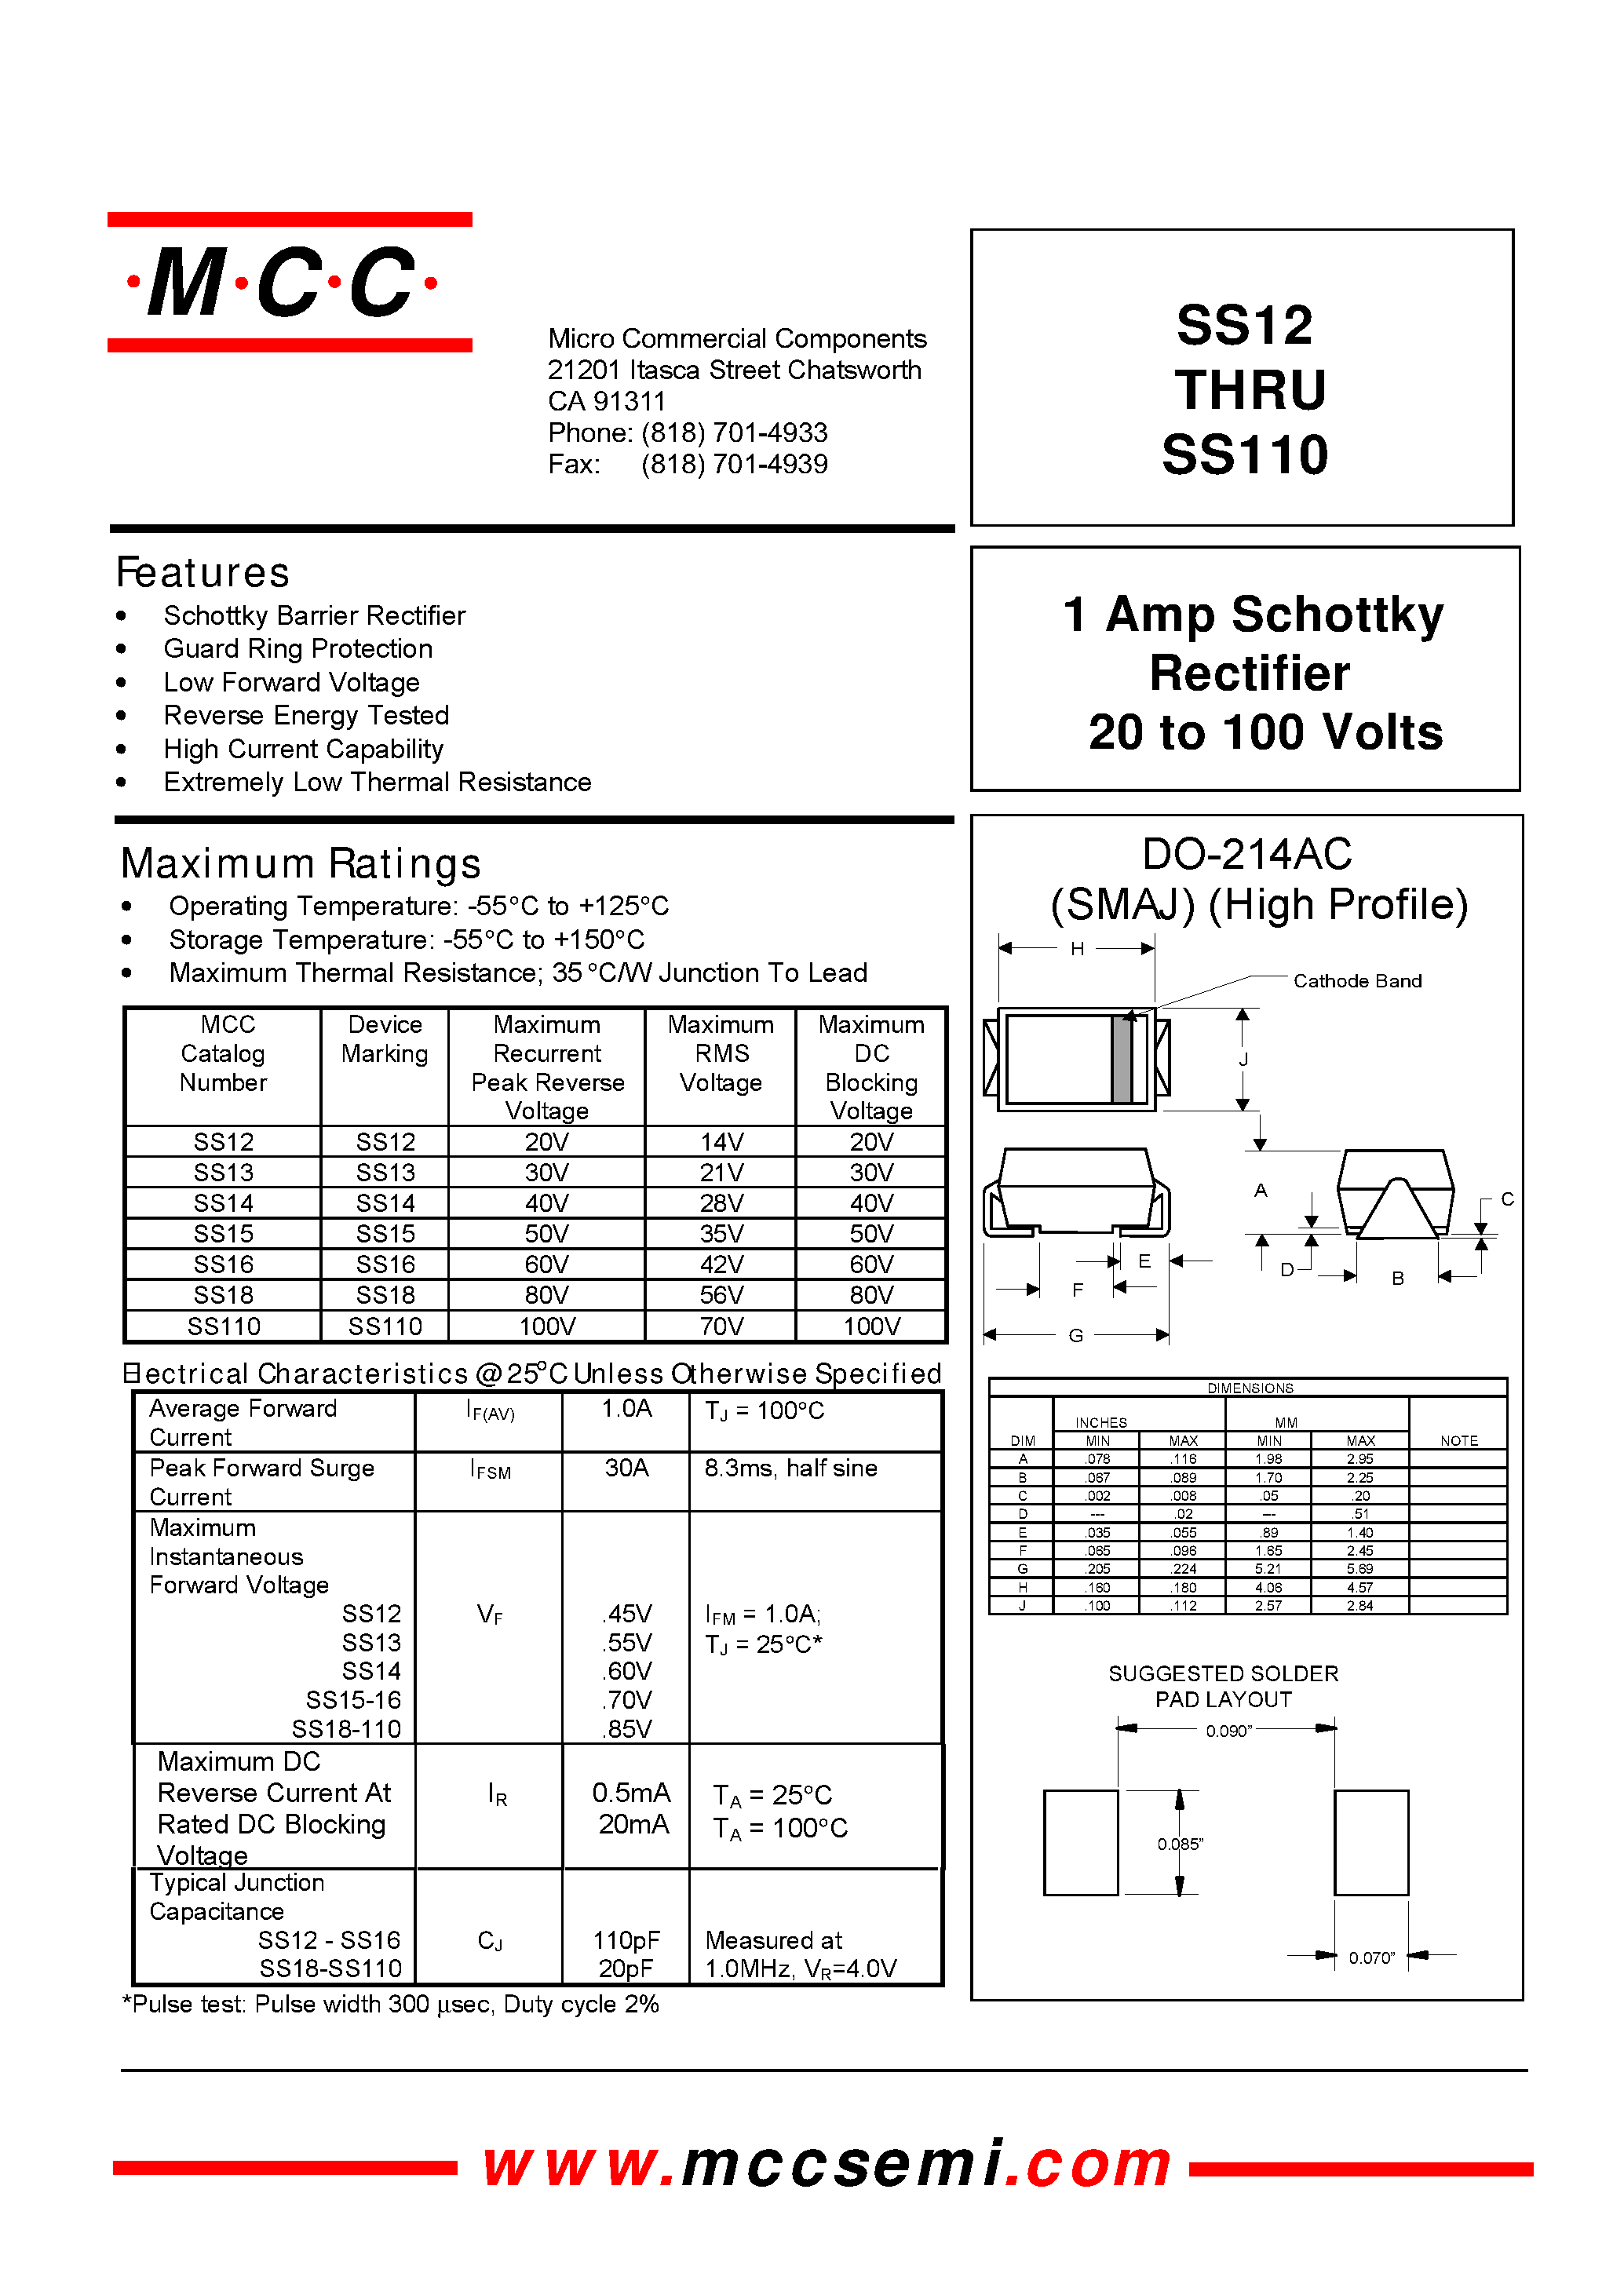 Datasheet SS12 - (SS12 - SS110) 1 Amp Schottky Rectifier 20 to 100 Volts page 1